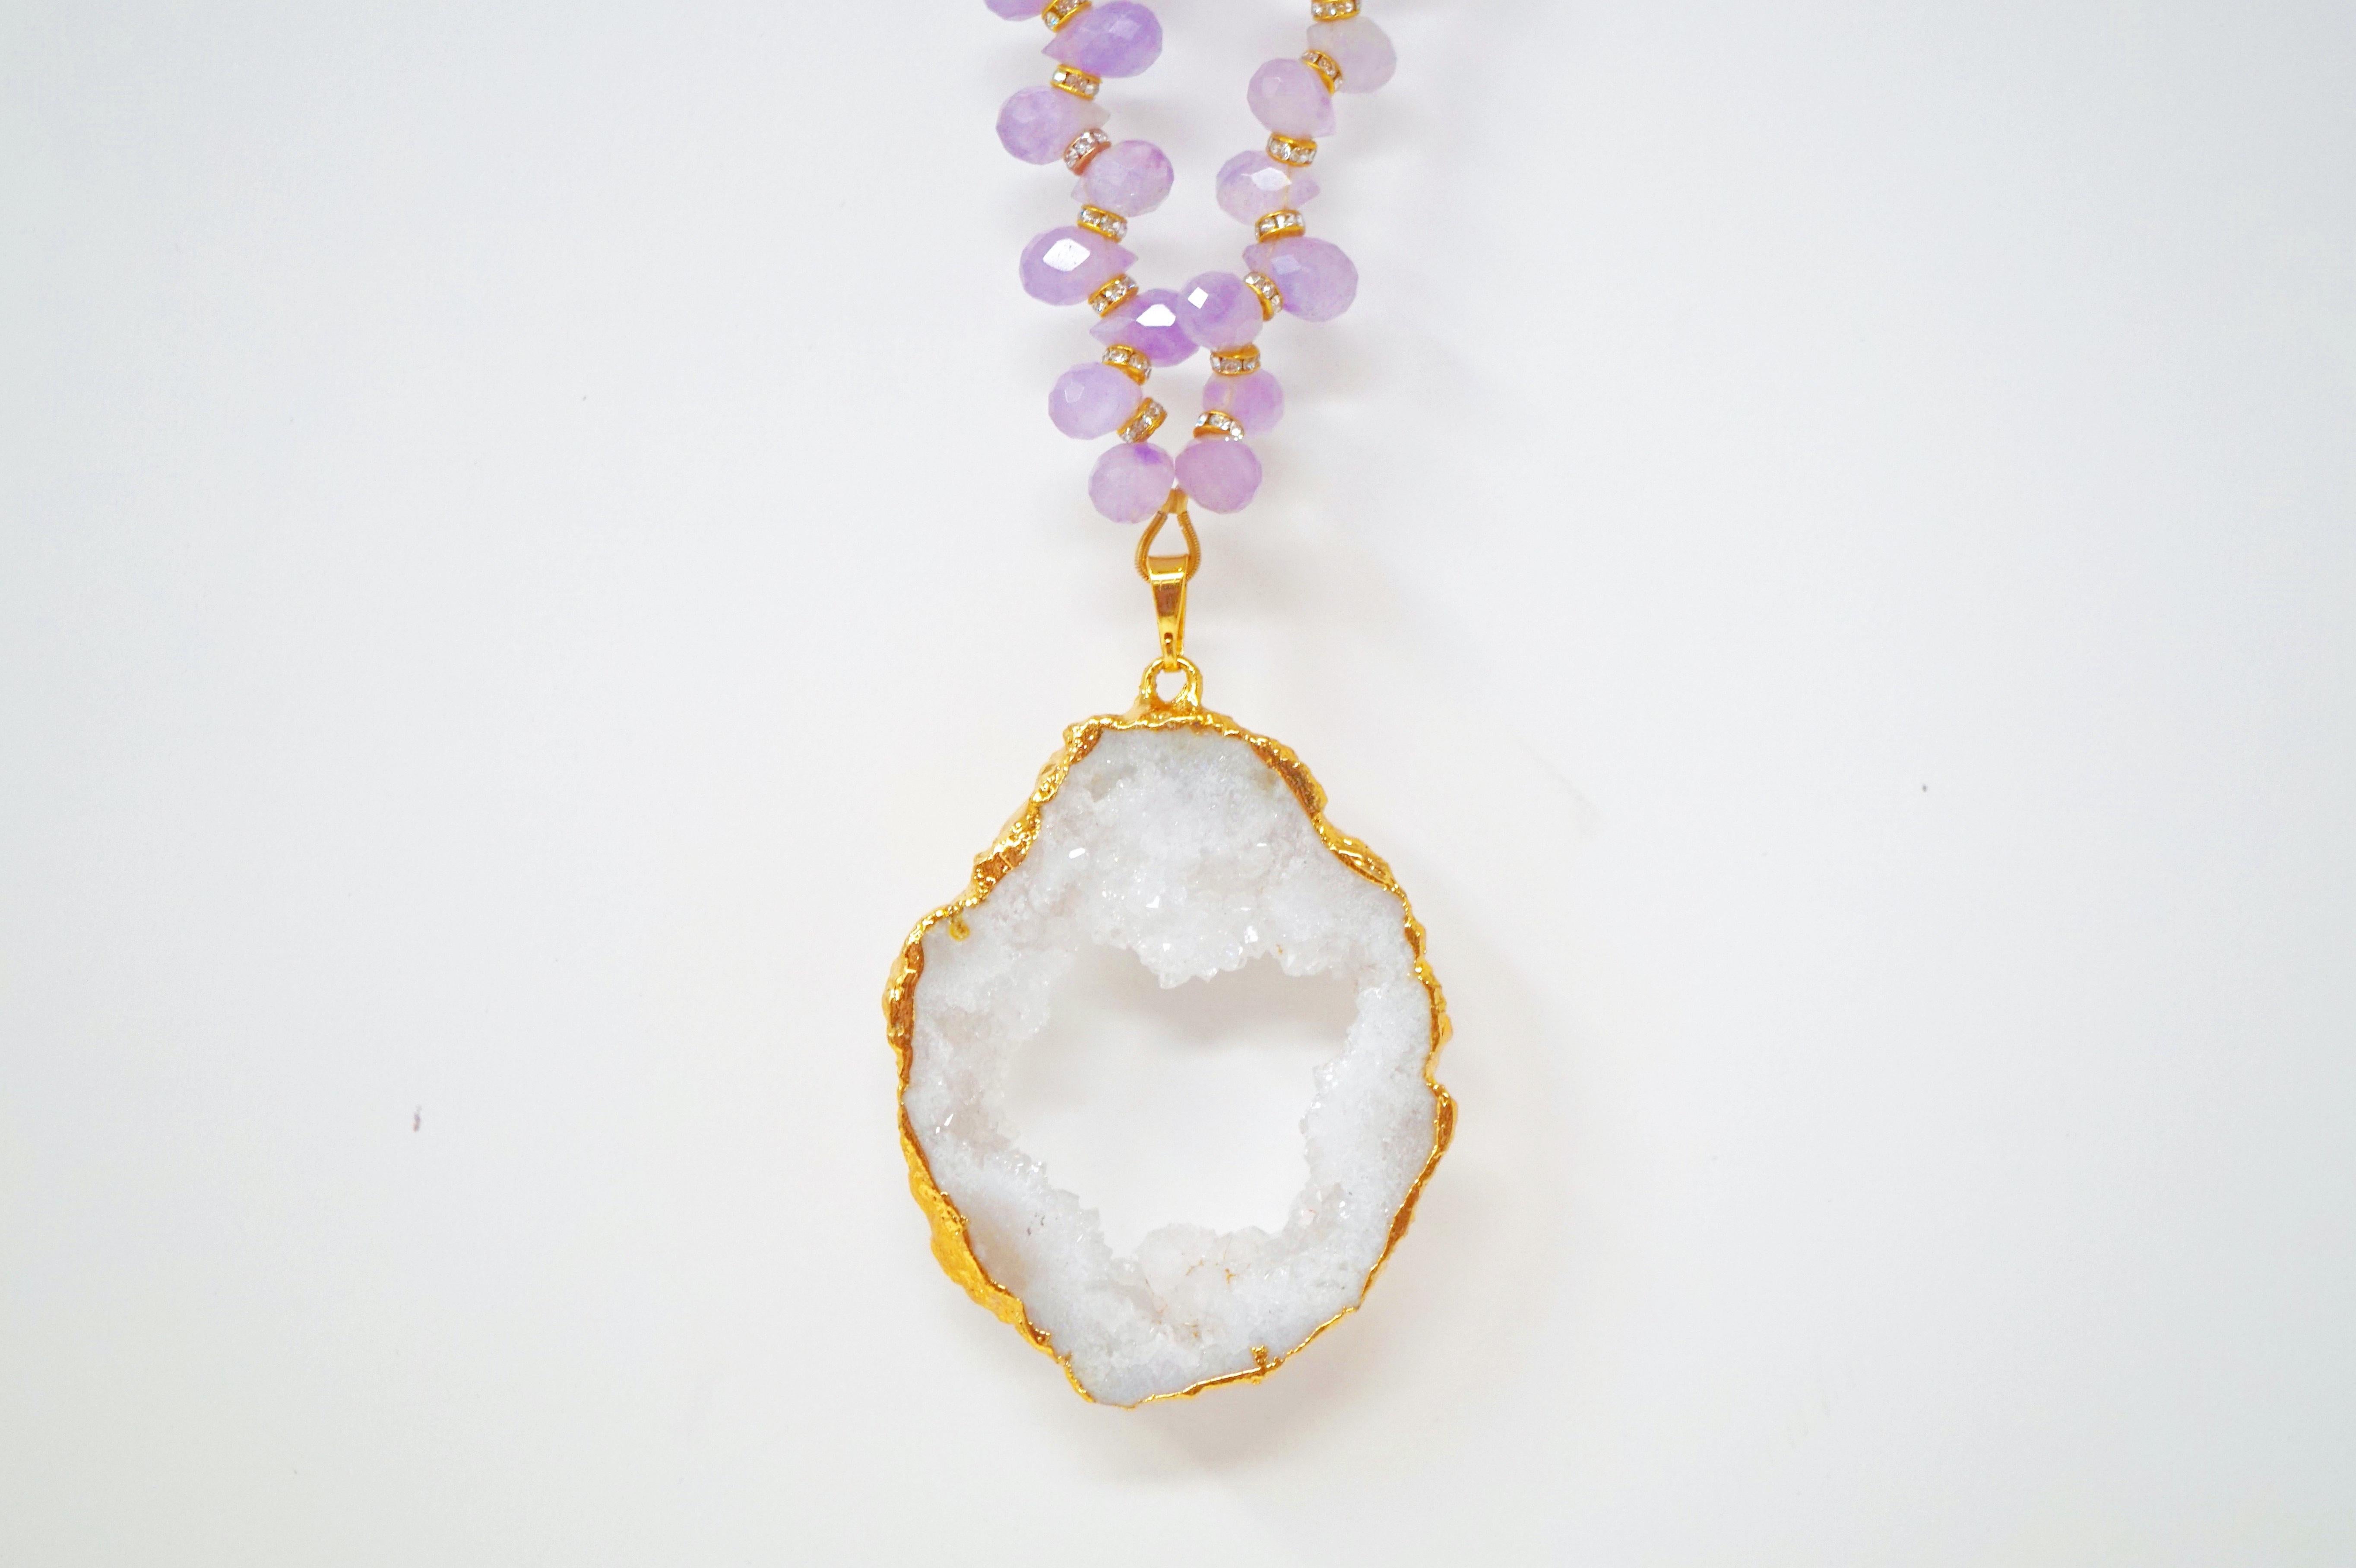 Modern Amethyst Gemstone Necklace with Swarovski Accents and Gilded Druzy Geode Pendant For Sale